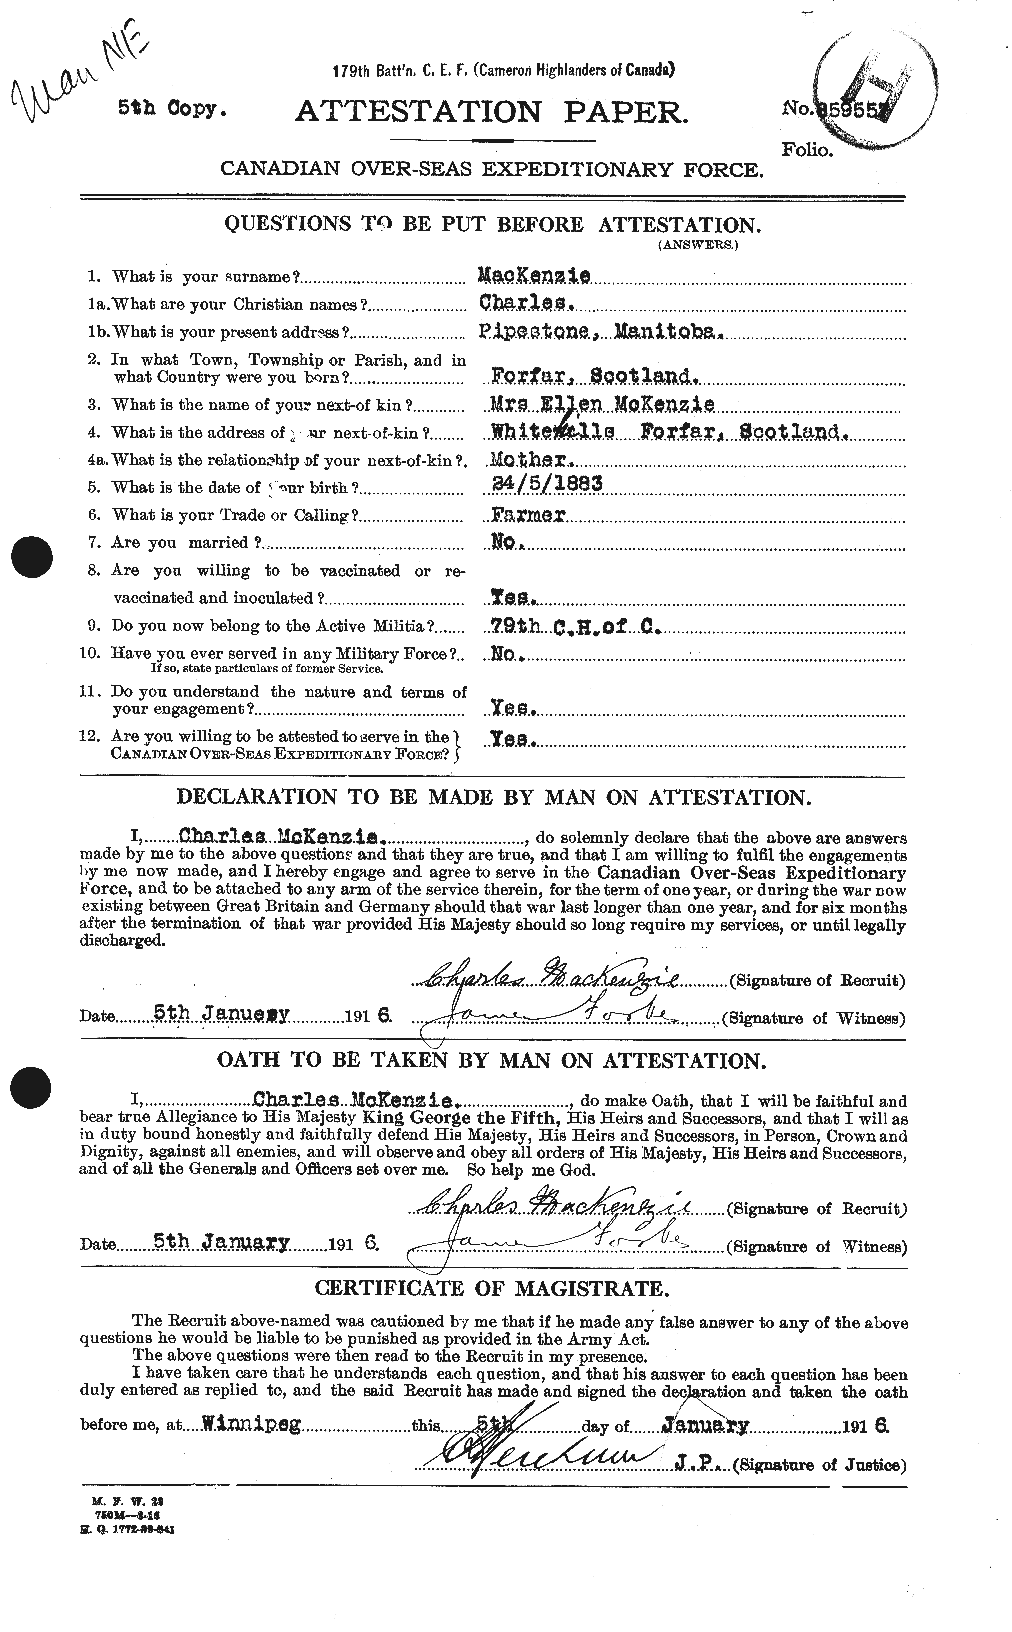 Personnel Records of the First World War - CEF 528916a